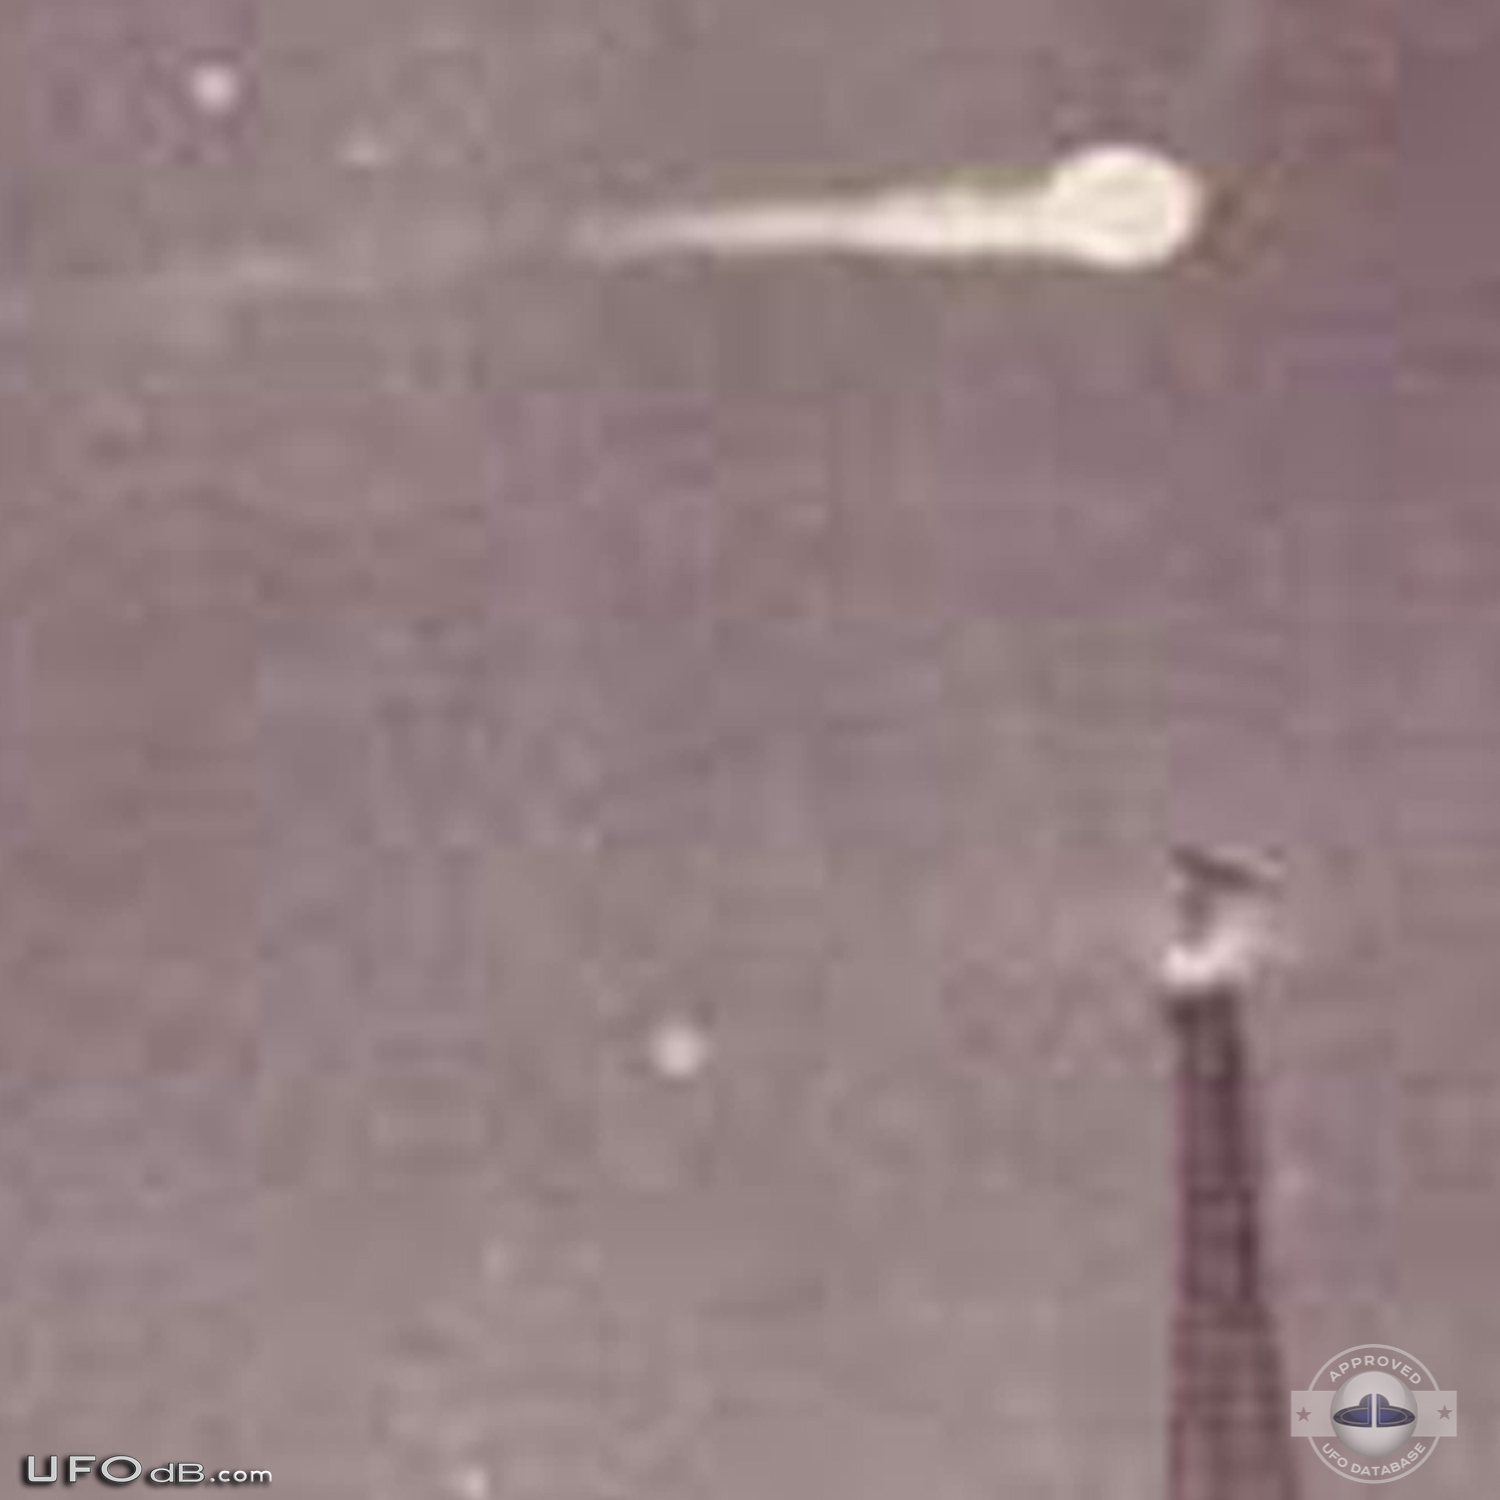 Old 1953 UFO sighting picture caught over Paris, France UFO Picture #543-5